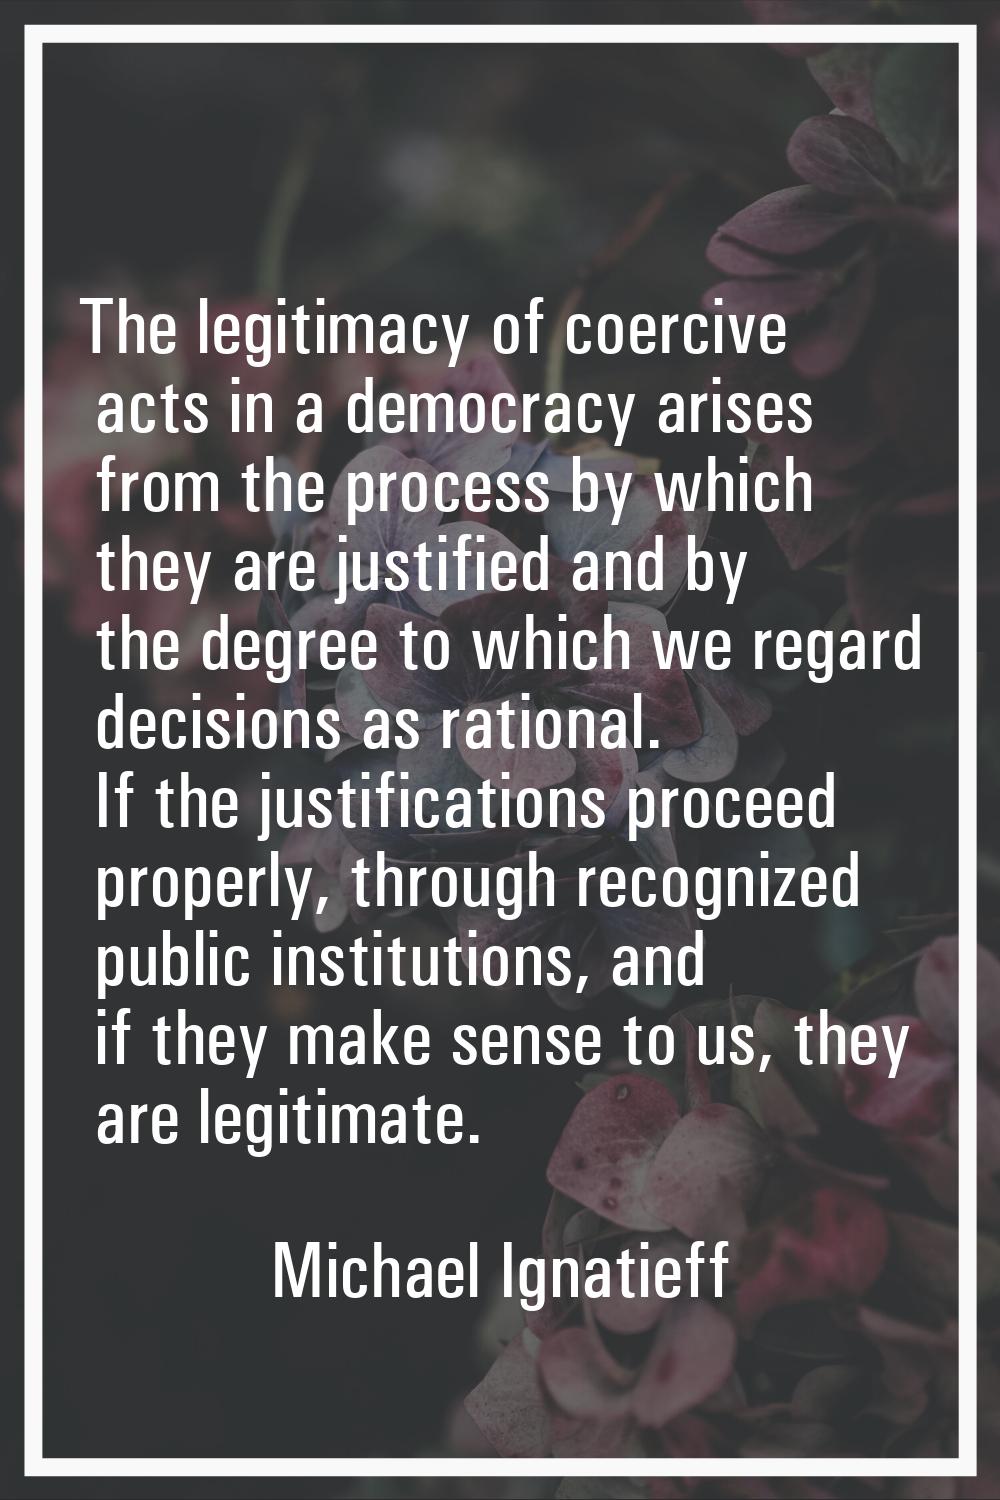 The legitimacy of coercive acts in a democracy arises from the process by which they are justified 